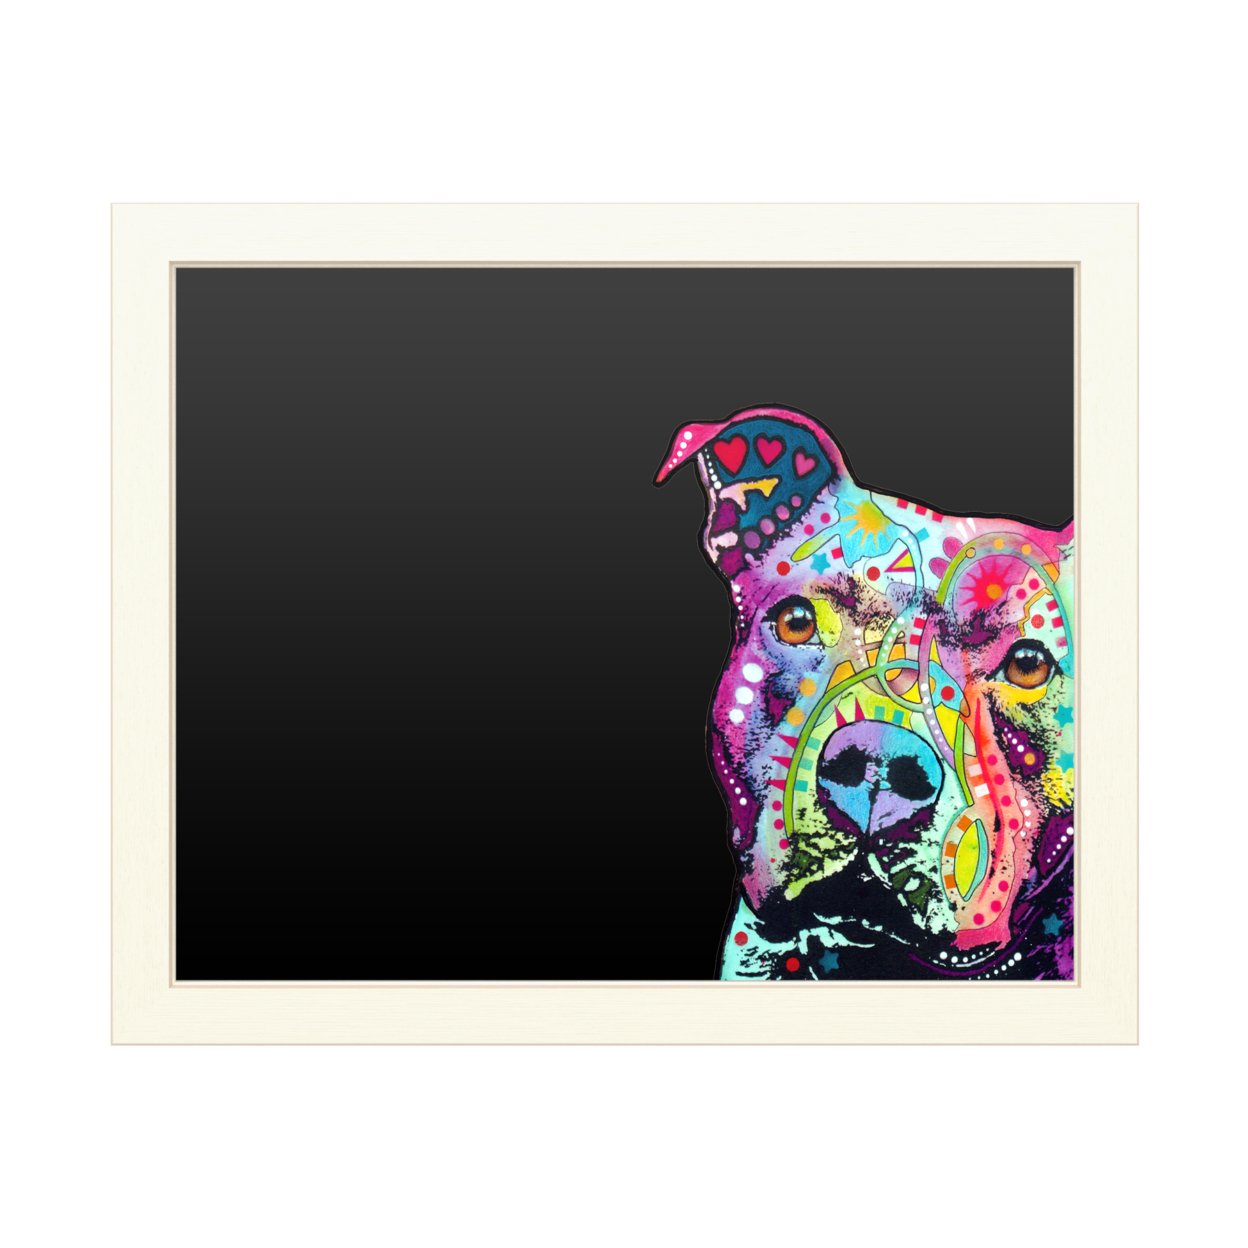 16 X 20 Chalk Board With Printed Artwork - Dean Russo Thoughtful Pitbull White Board - Ready To Hang Chalkboard